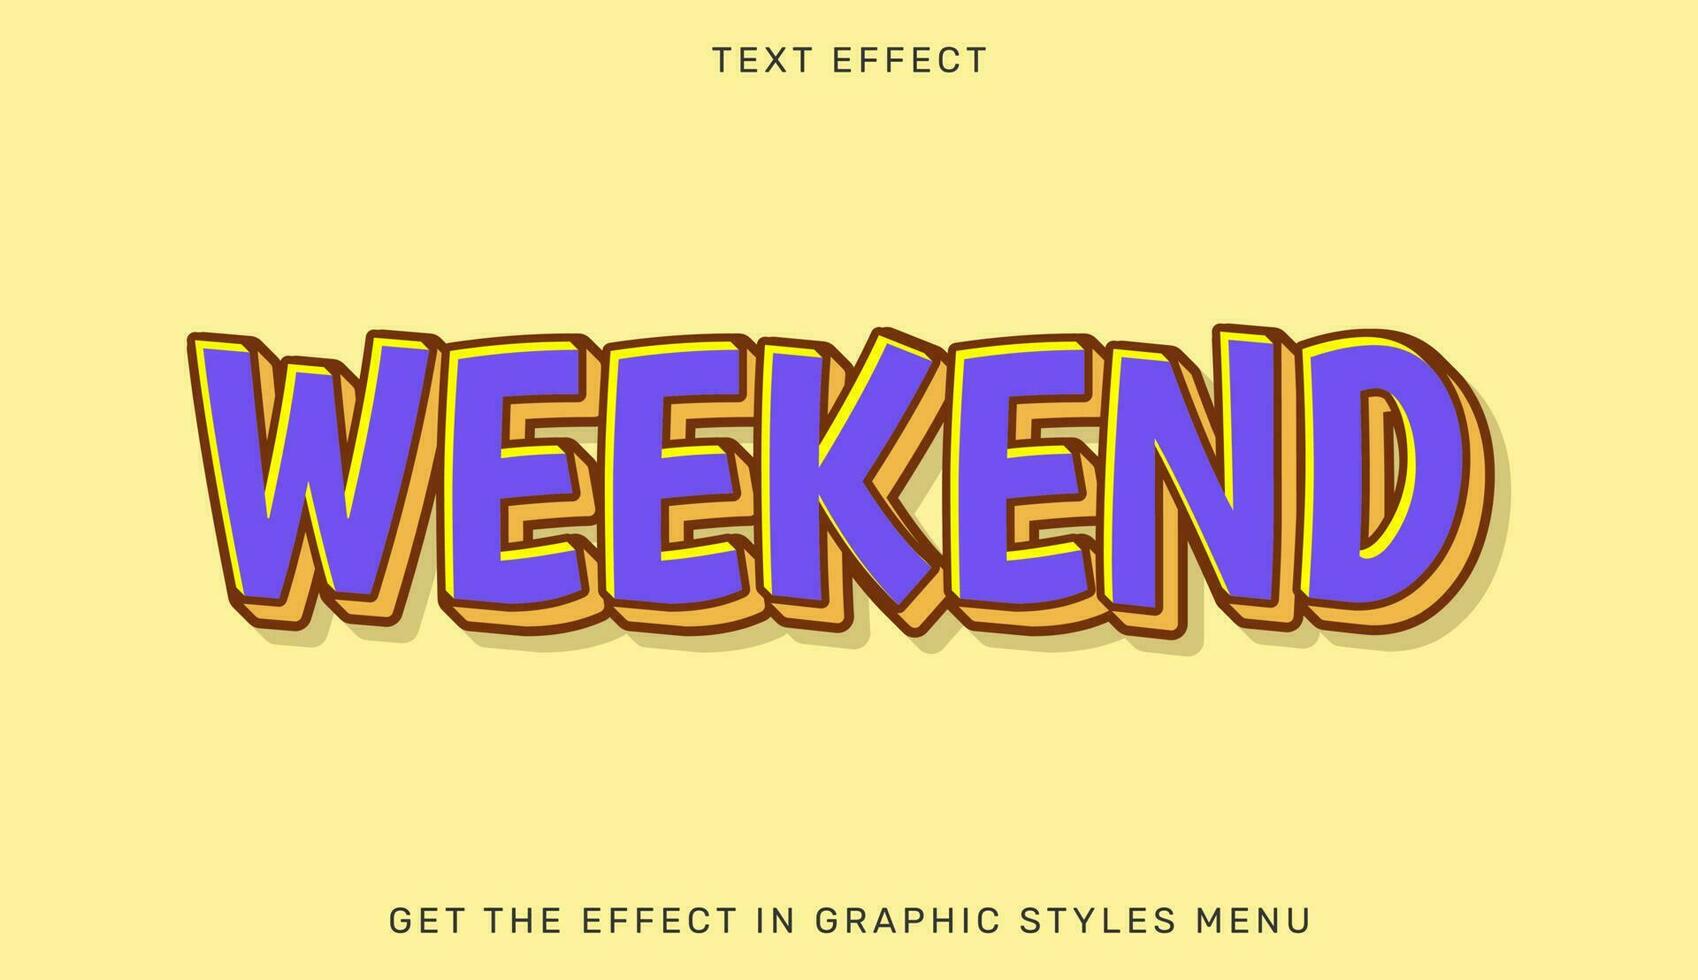 Vector illustration of weekend text effect